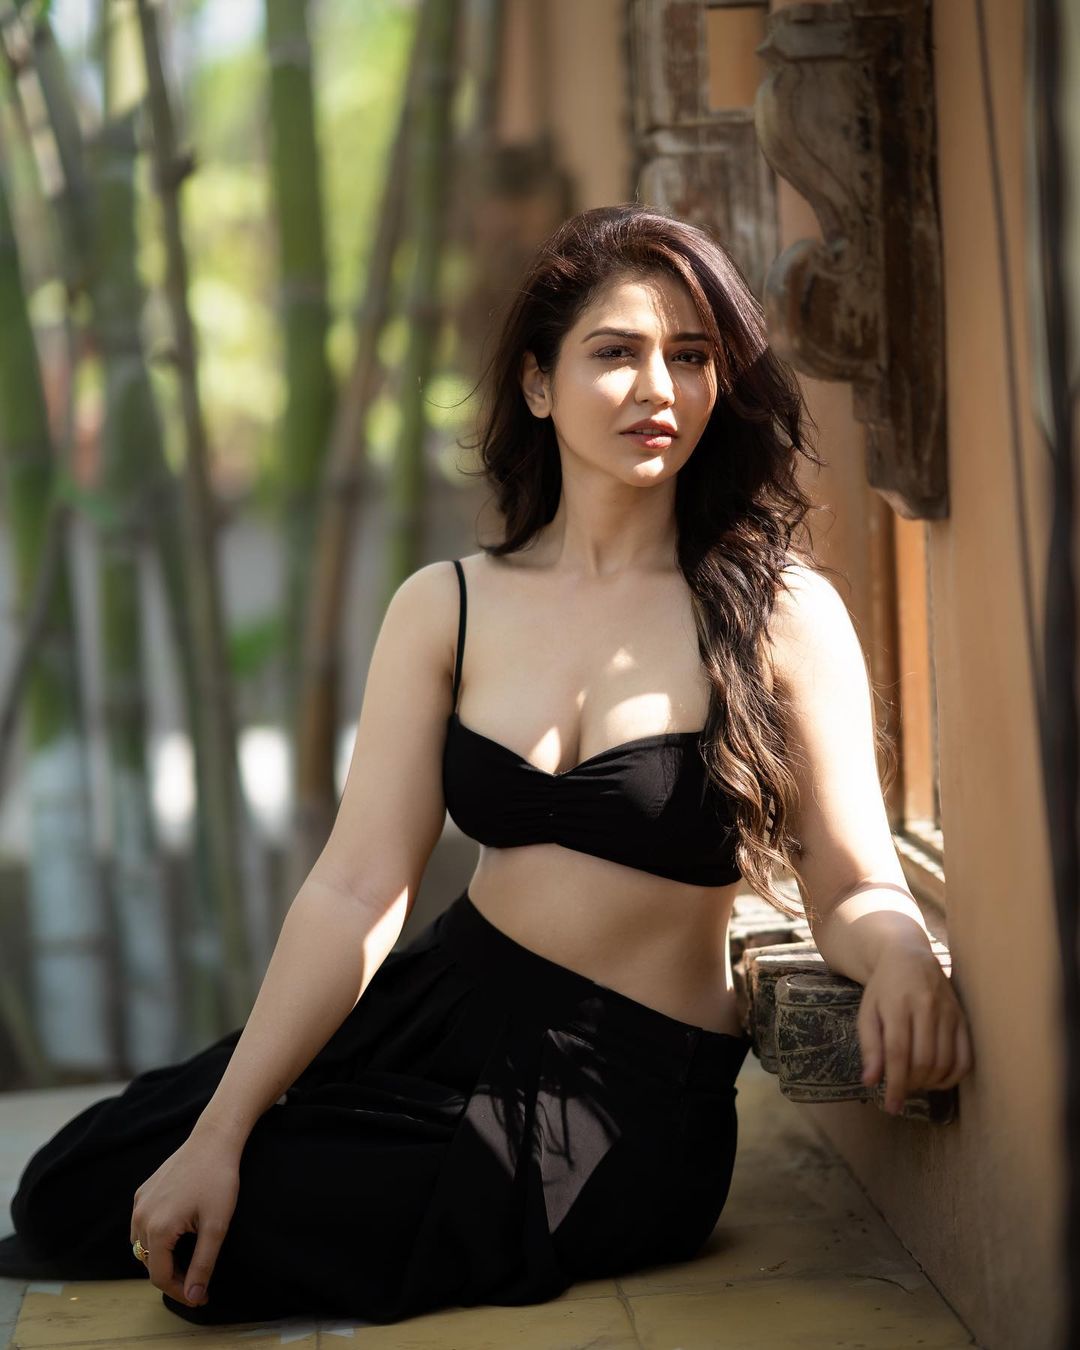 Priyanka Jawalkar looks sizzling hot in this tiny black top flaunting her  sexy toned midriff - see now.